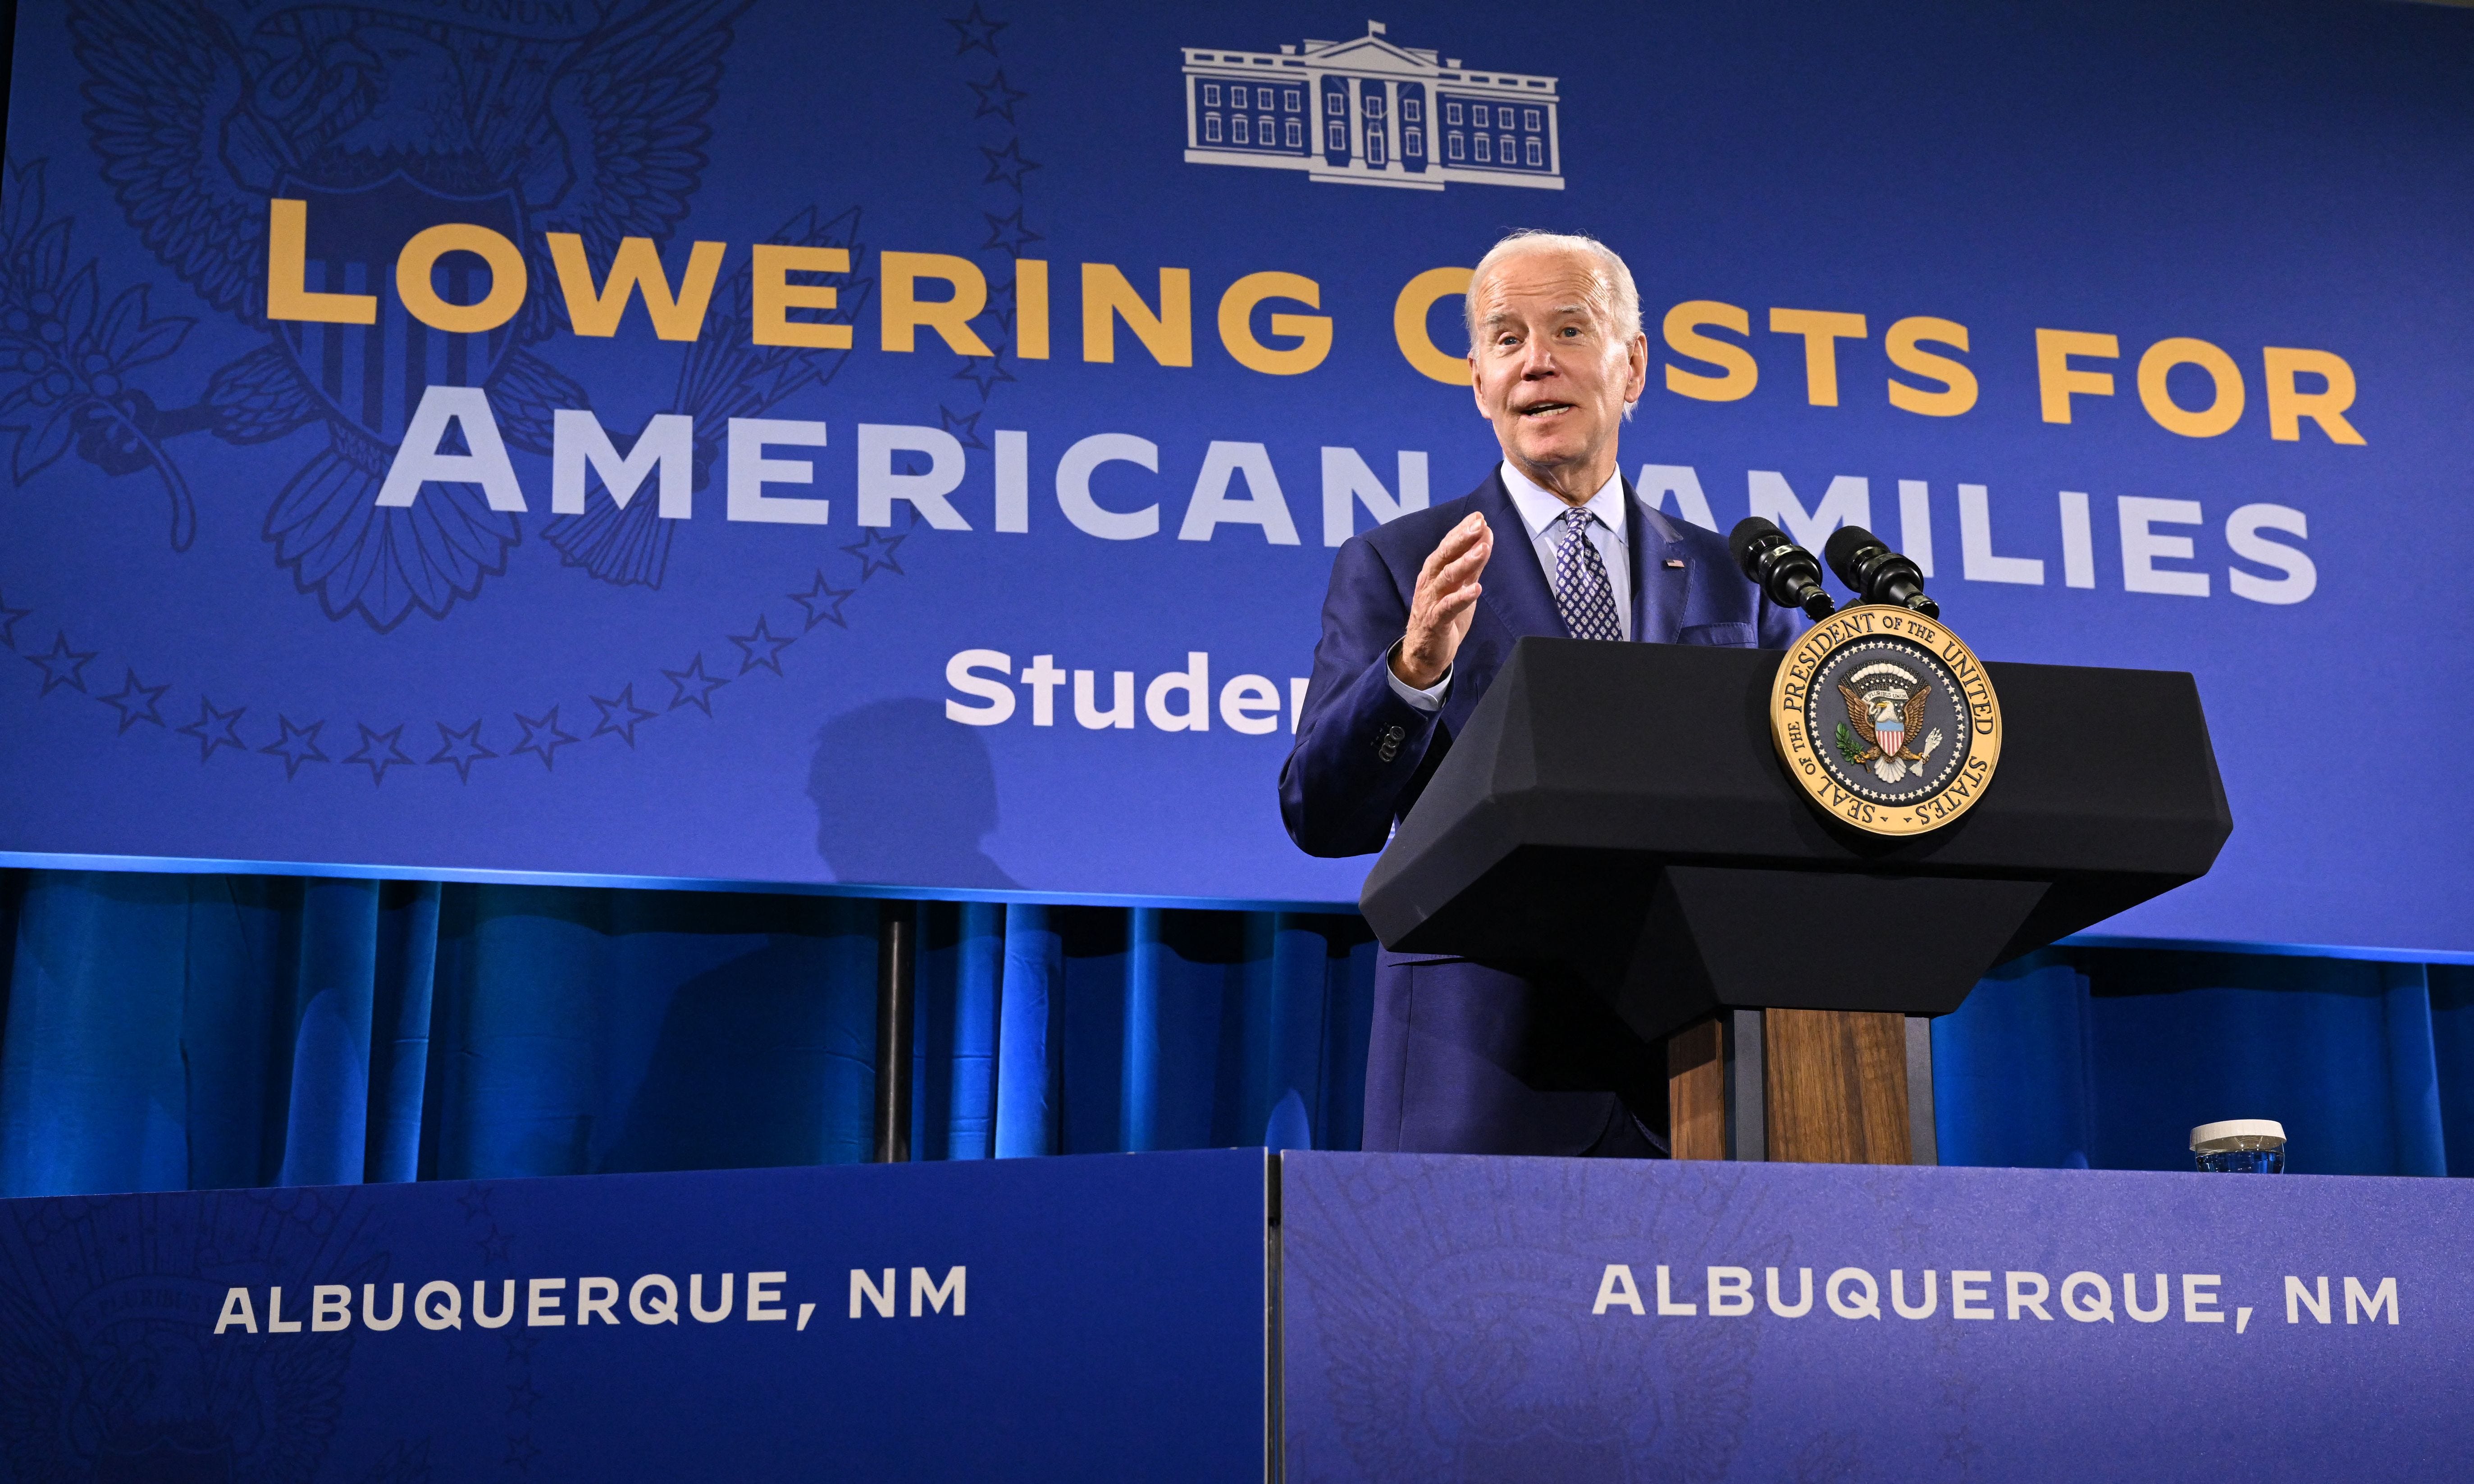 About 18 million college students got a financial boost from Biden's COVID-19 rescue law